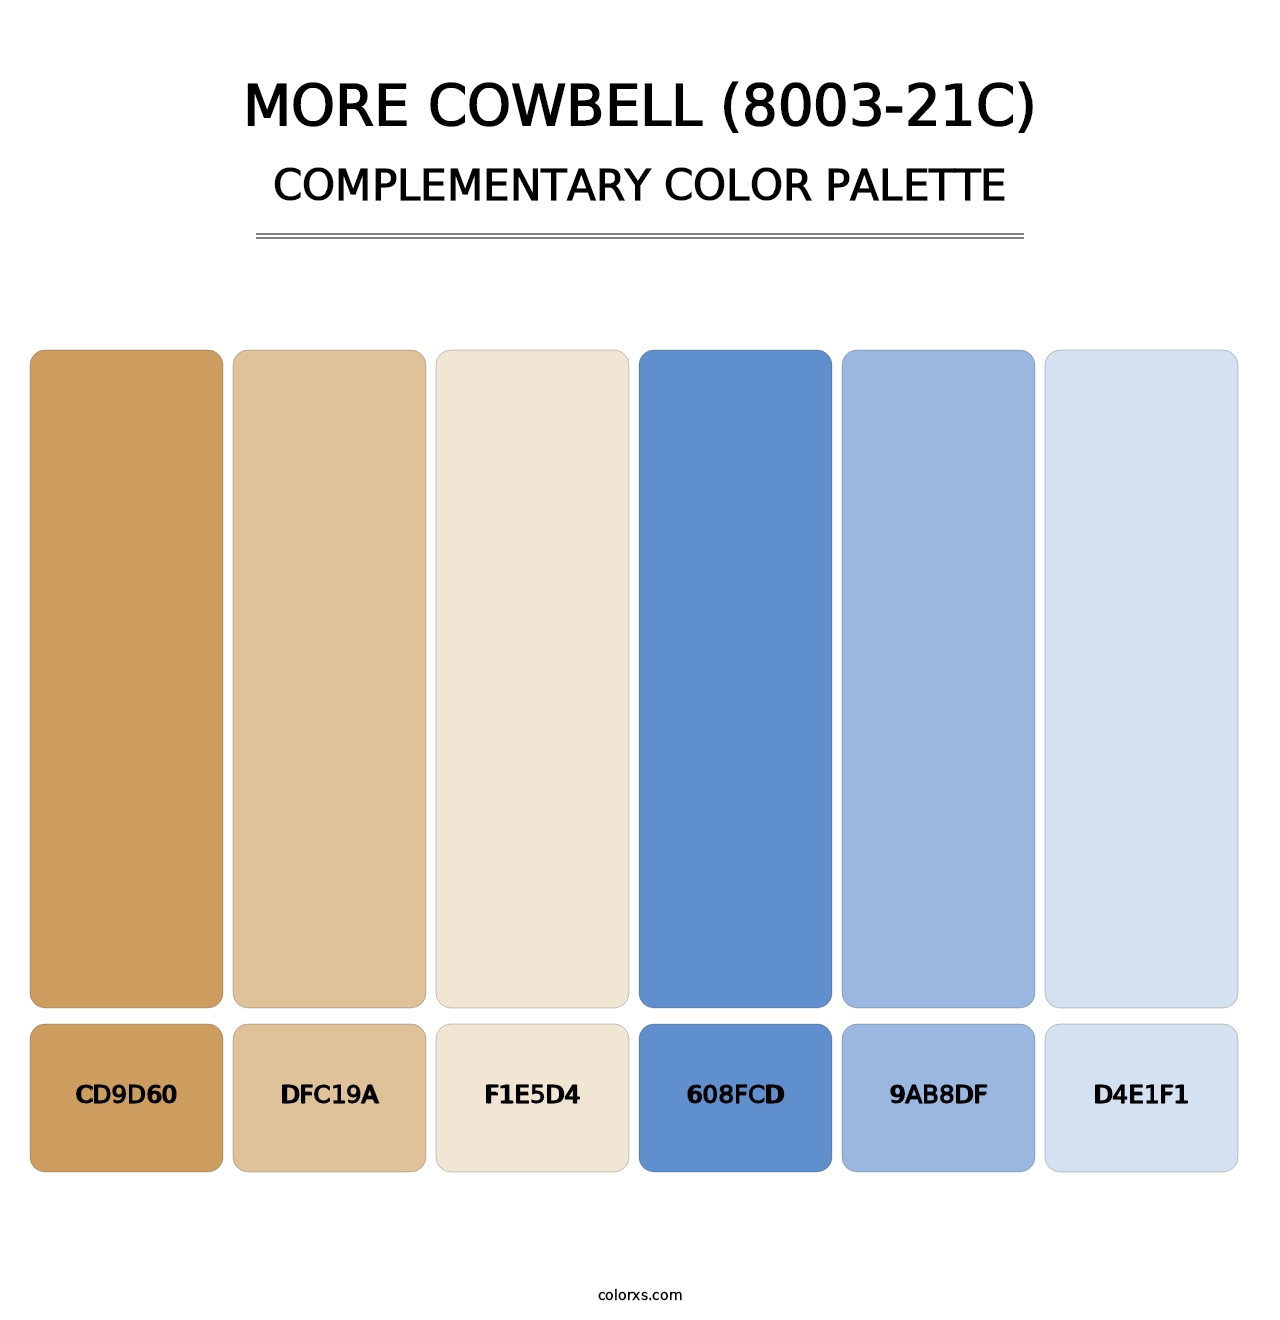 More Cowbell (8003-21C) - Complementary Color Palette